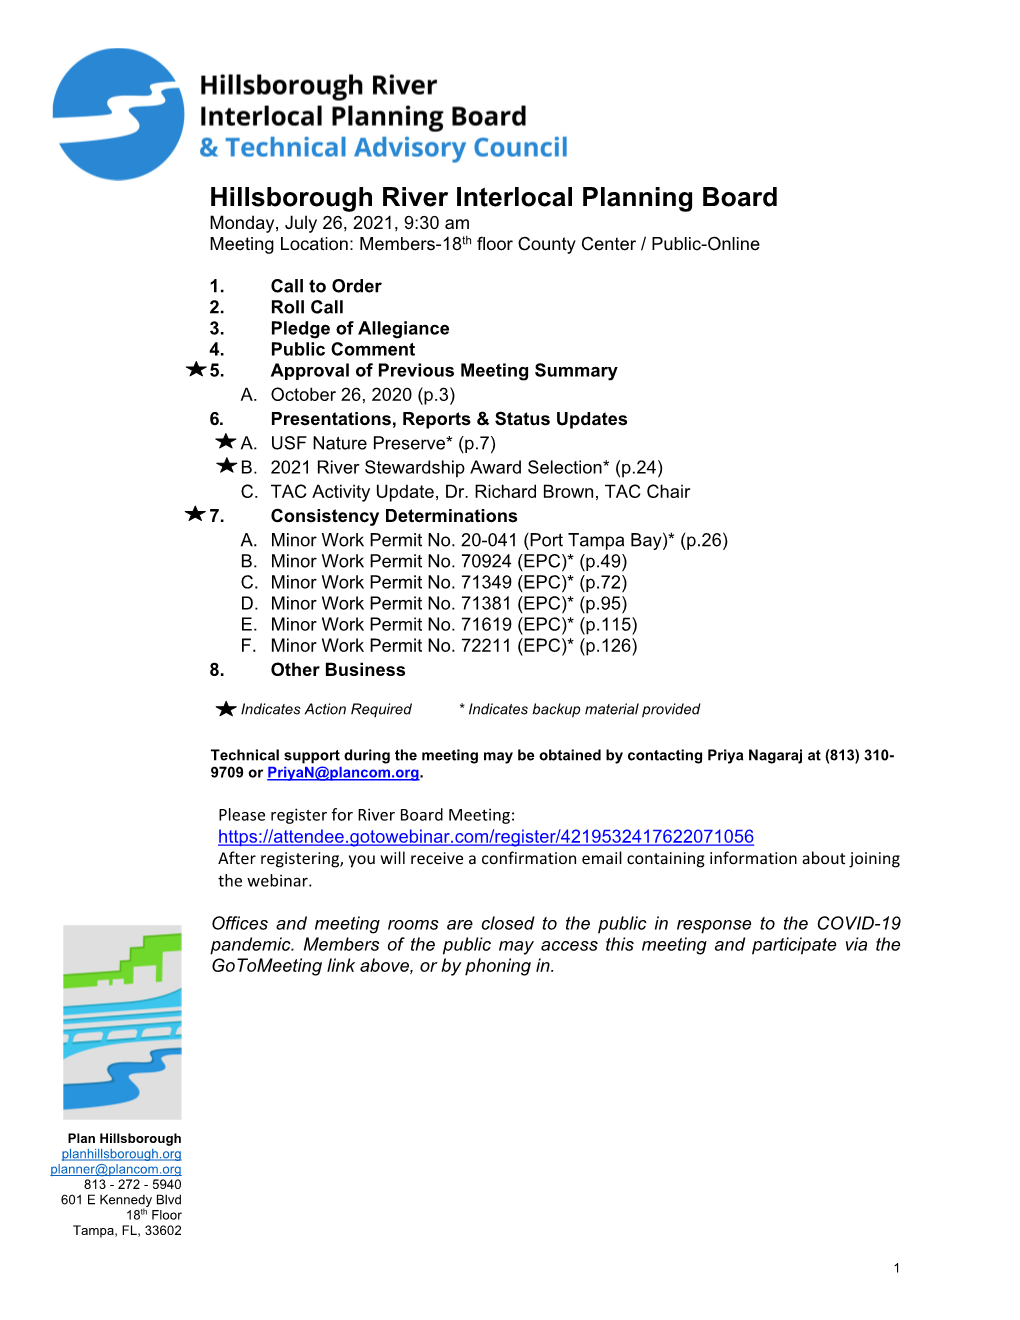 Hillsborough River Interlocal Planning Board Monday, July 26, 2021, 9:30 Am Meeting Location: Members-18Th Floor County Center / Public-Online